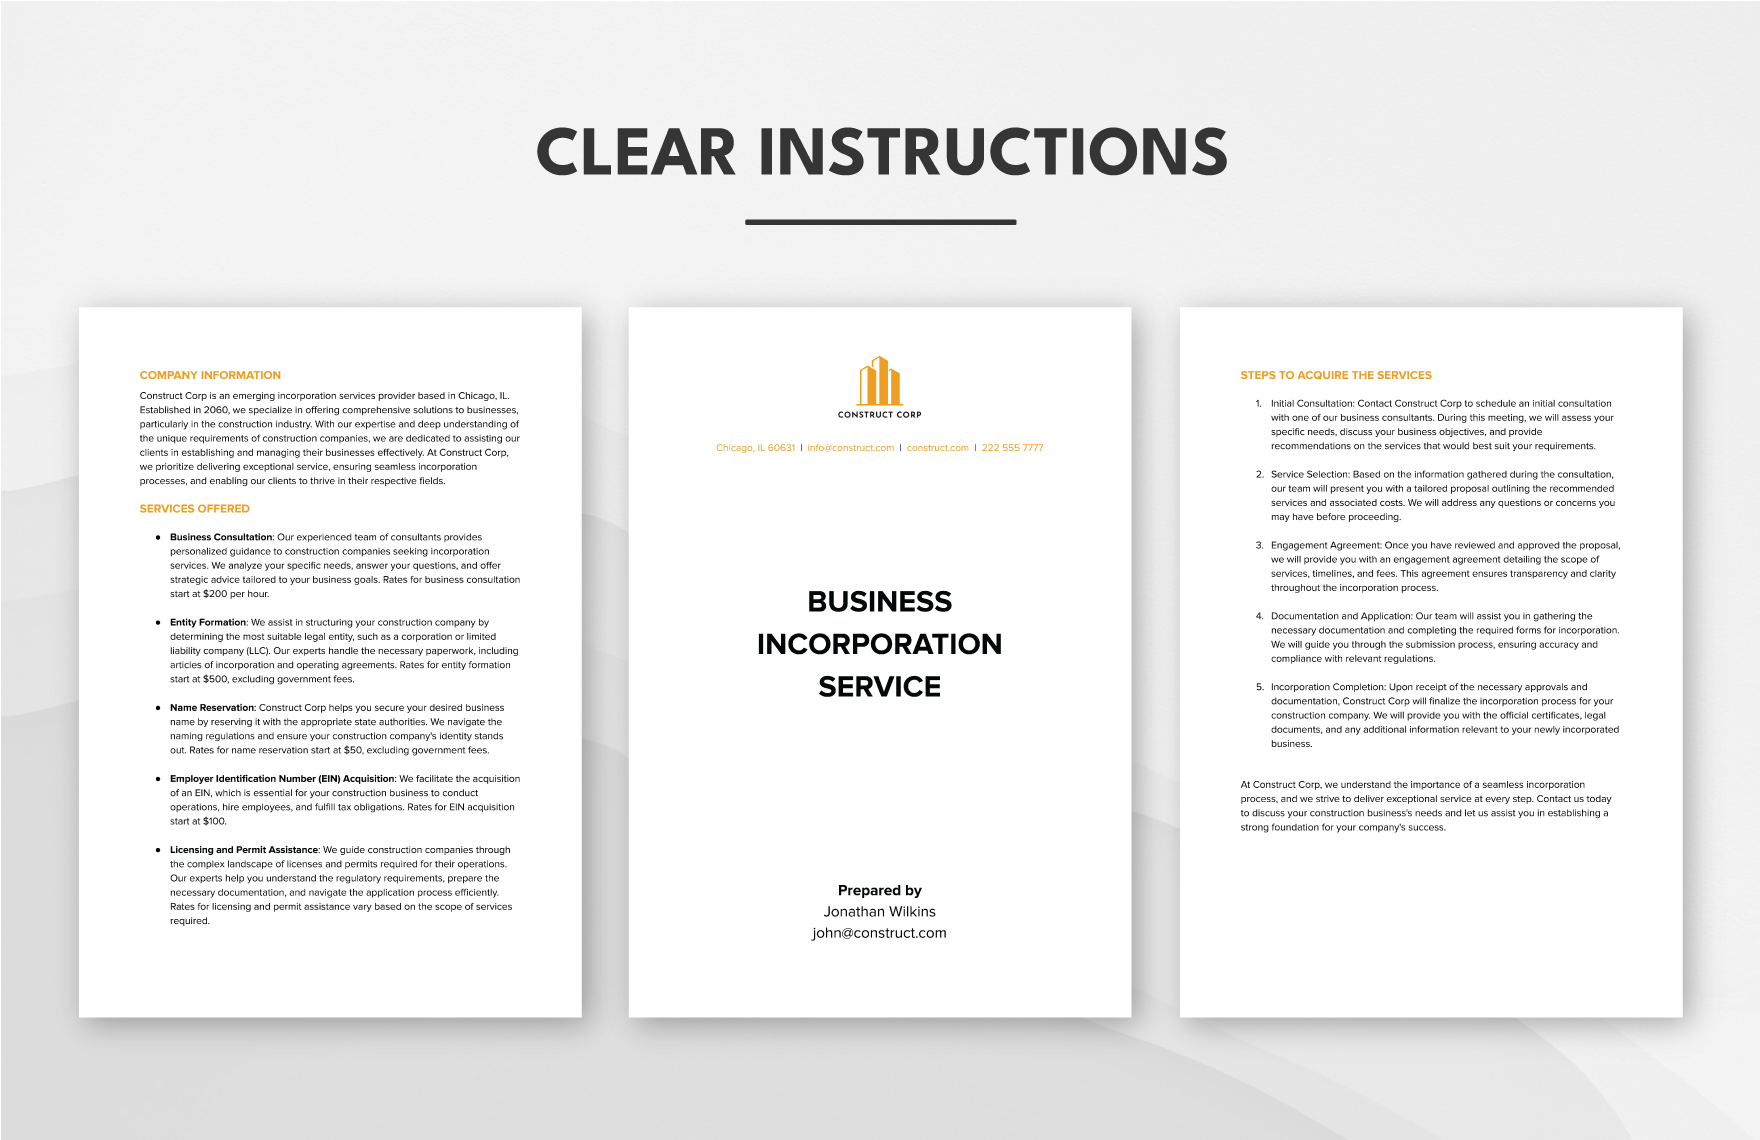 Business Incorporation Service Template